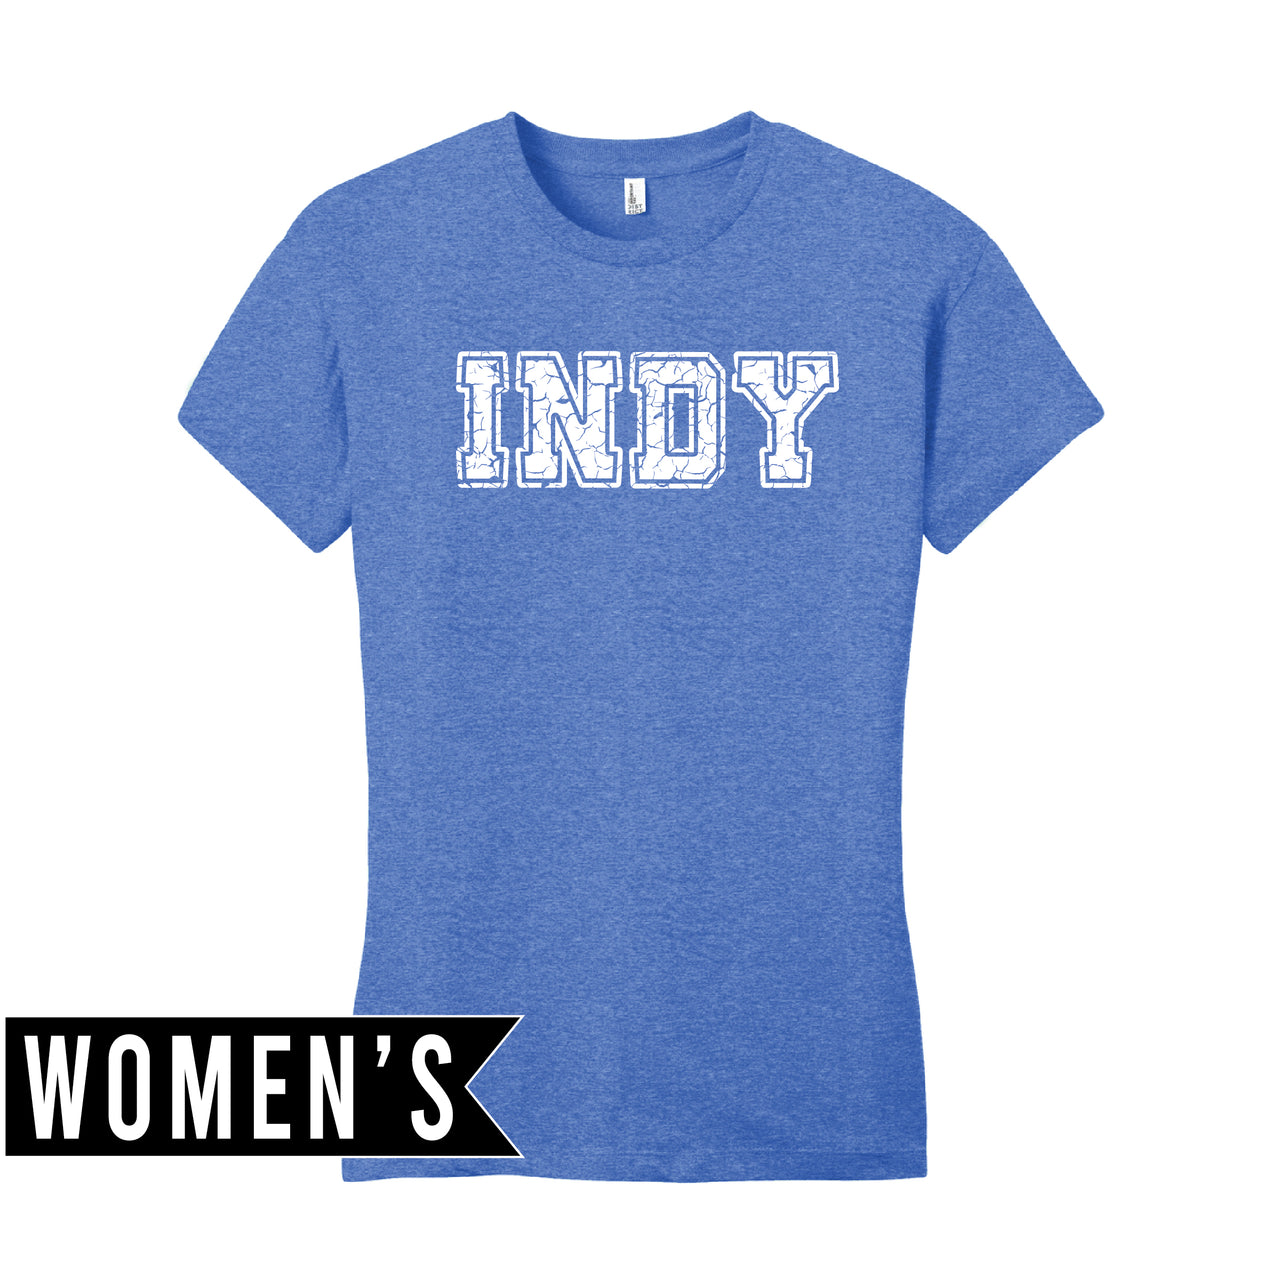 Women’s Fitted T-Shirt - Indy